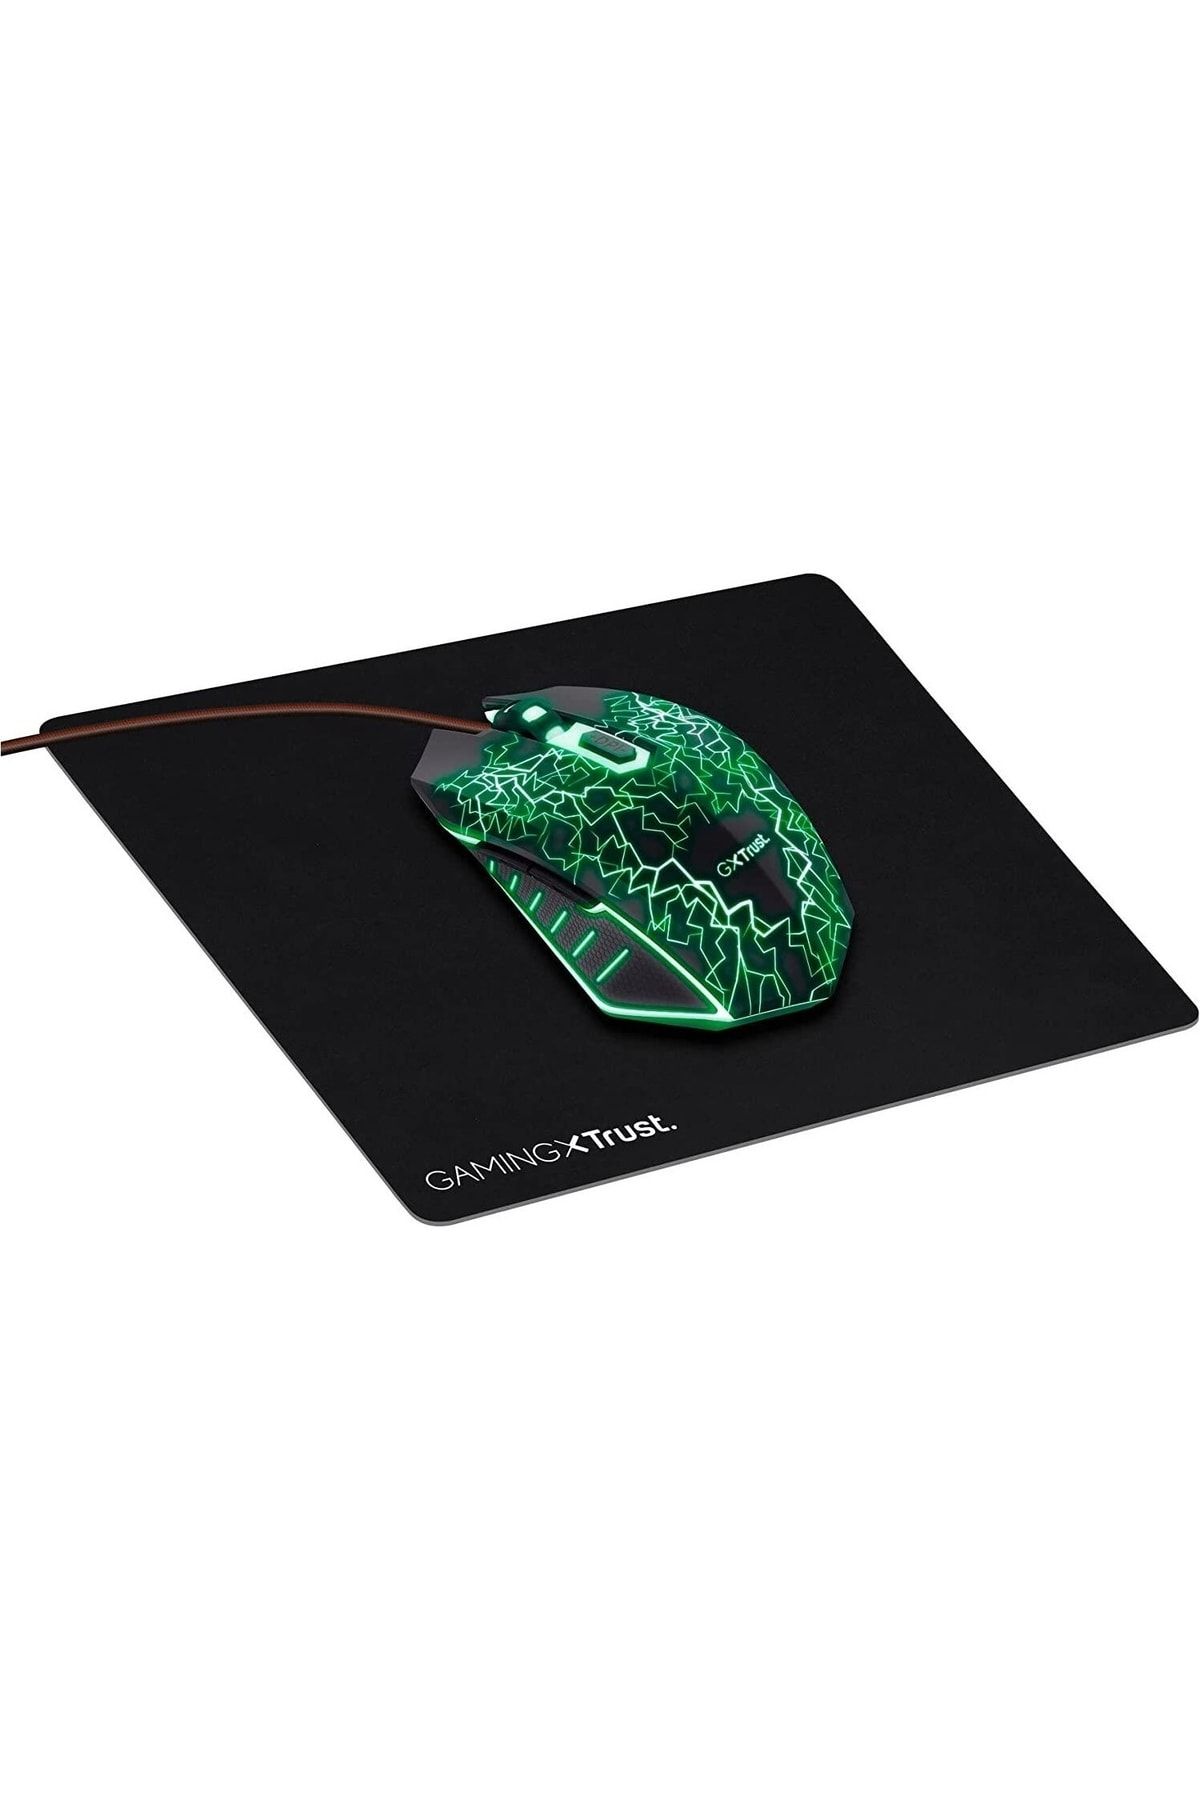 Trust 24625 Gxt 783x Gaming Mouse Ve Mouse Pad